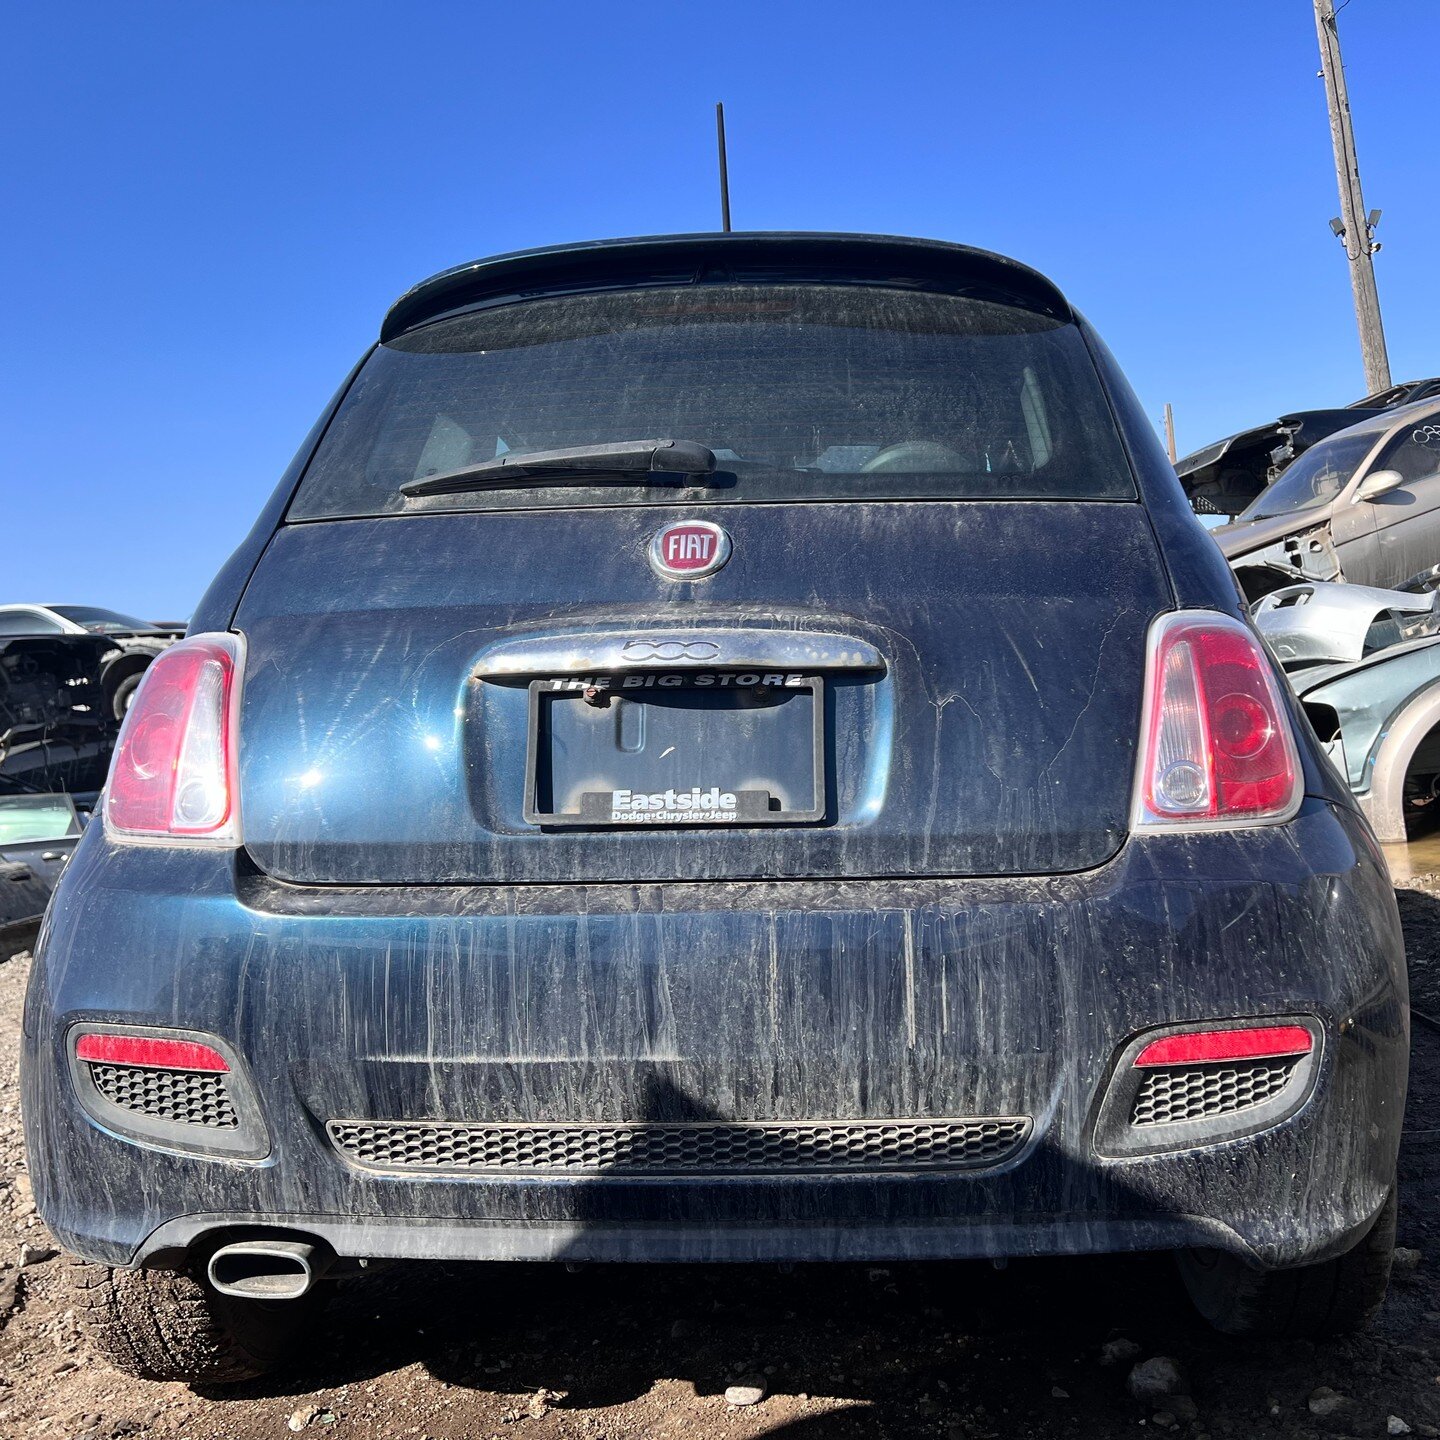 2013 500 FIAT SPORT 1.4L *FOR PARTS* - FWD, 5 SPEED MANUAL TRANSMISSION, 4 CYCLINDER , BLUE(PPS), KMS:276531, VIN:3C3CFFBR1DT516102

We offer contactless delivery and are more than willing to accommodate your needs.
Why pick your part when we pull it